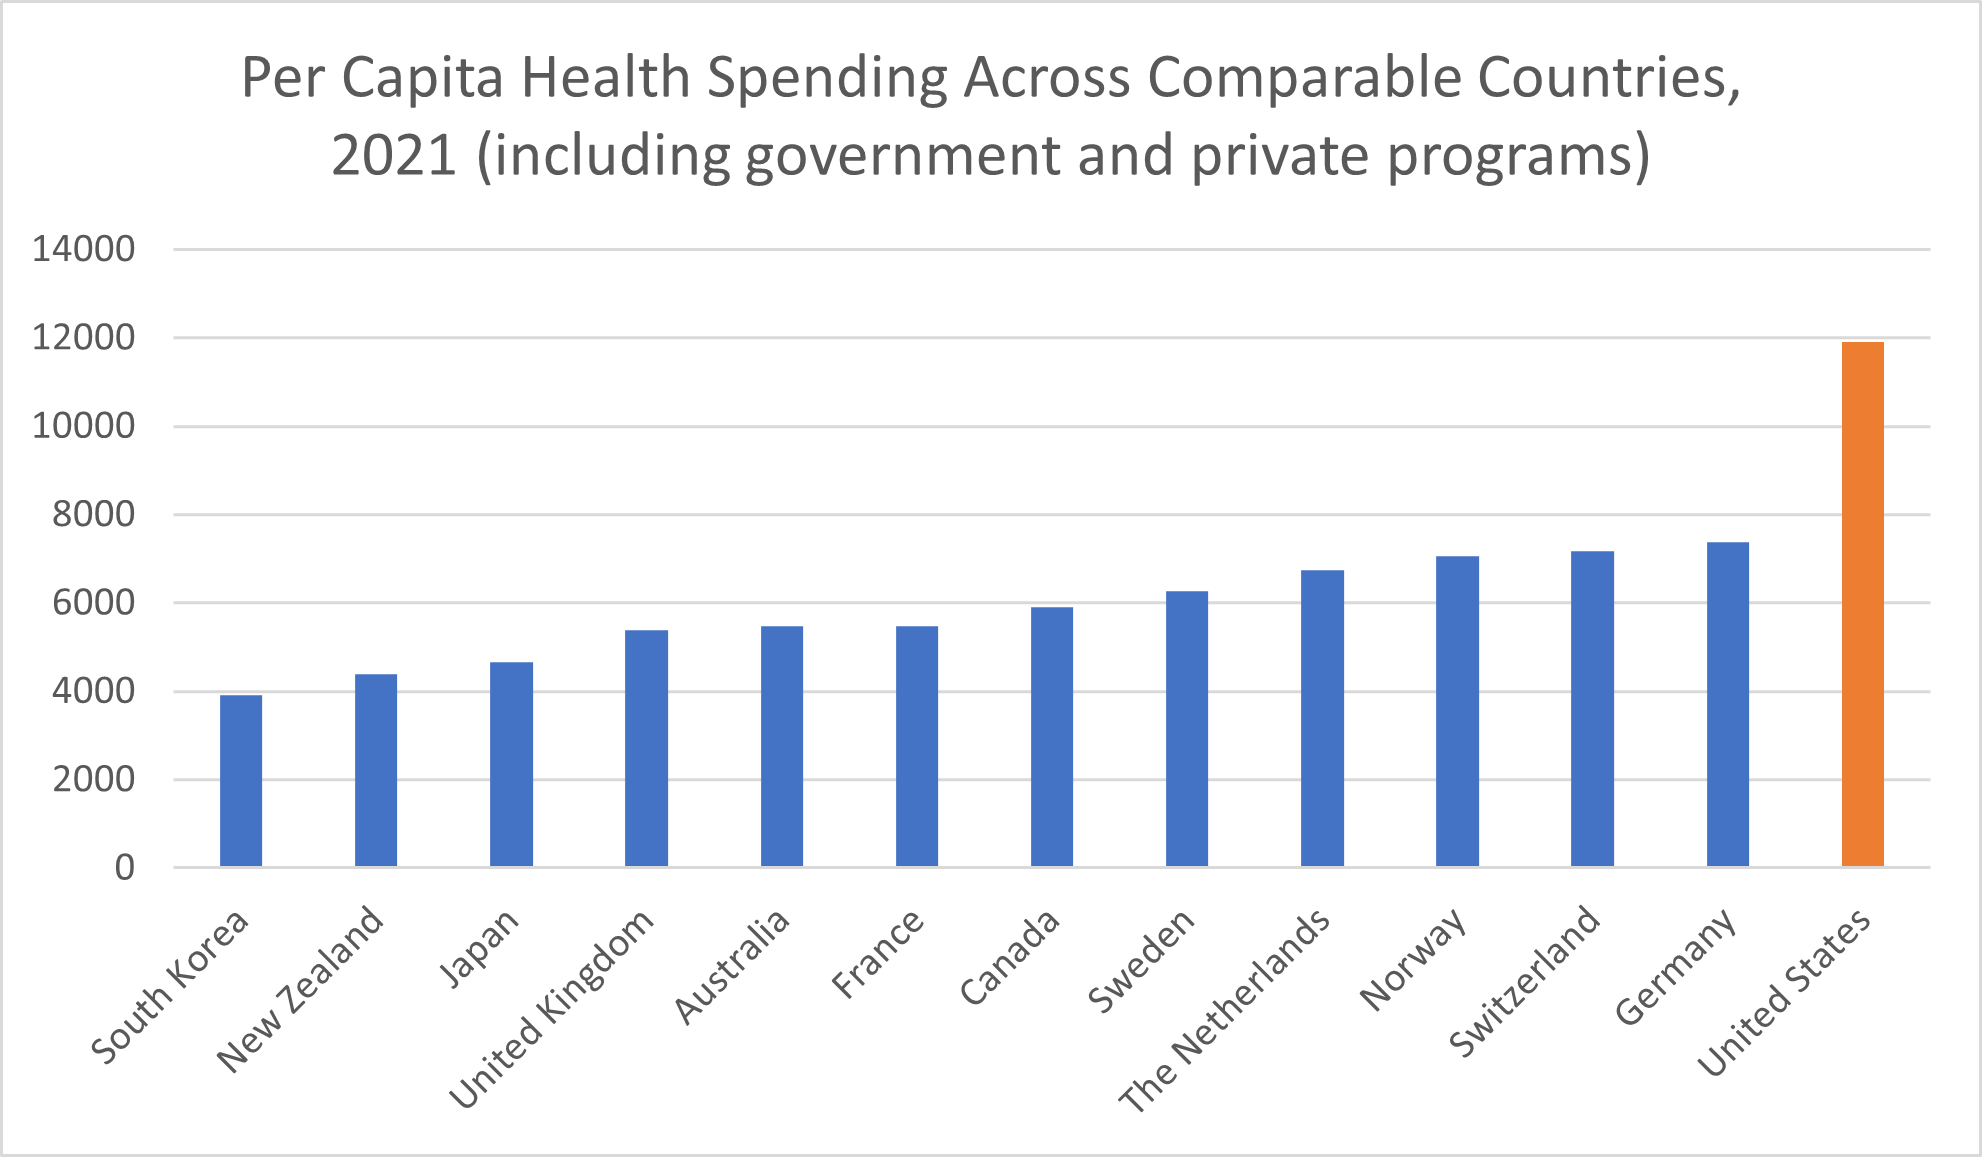 Per Capita Health Spending Across Comparable Countries, 2021 (including government and private programs)